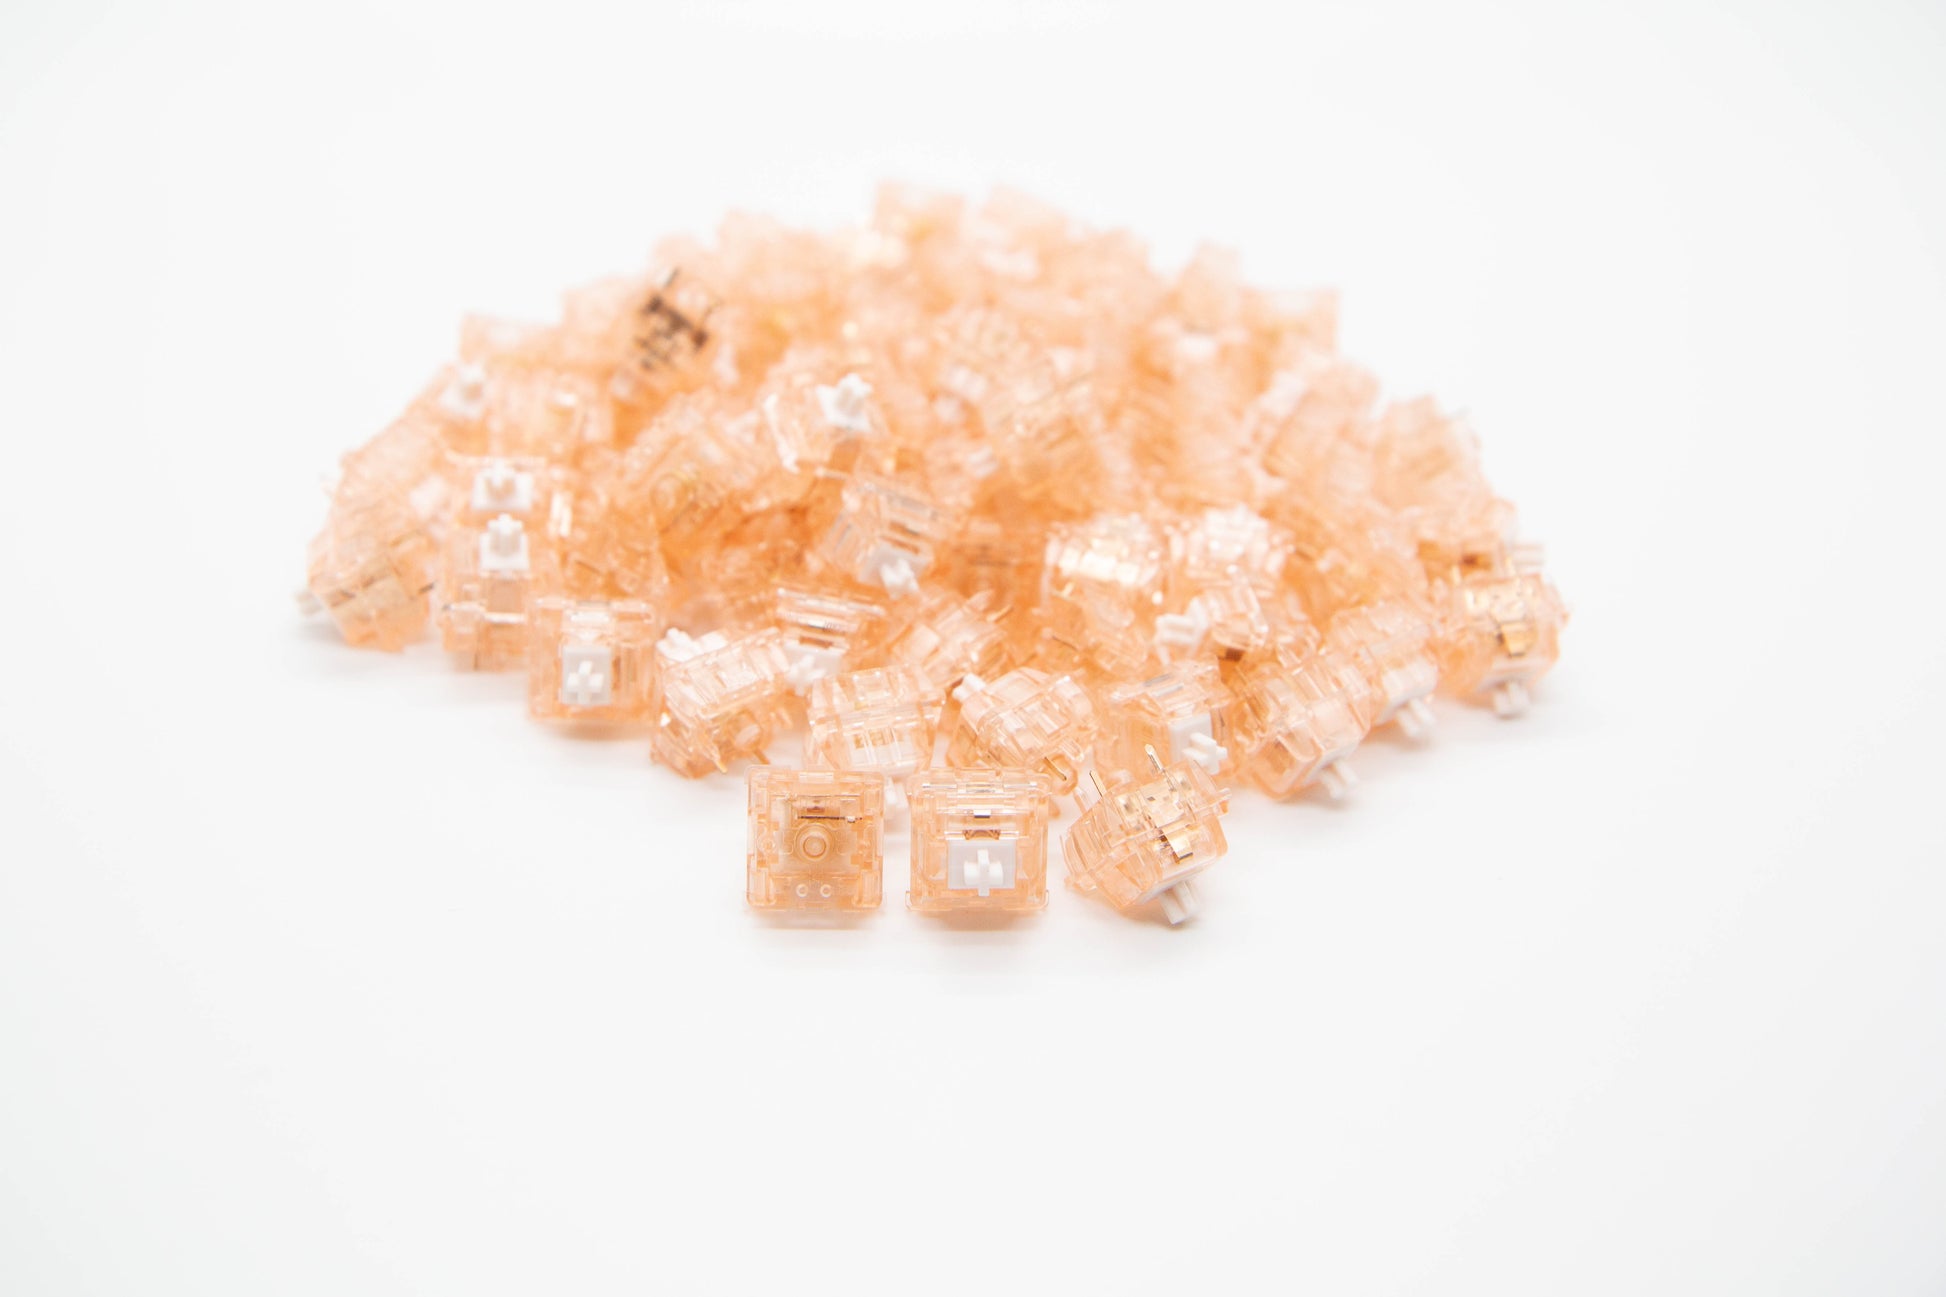 Close-up shot of a pile of Quartz mechanical keyboard switches featuring tan transparent housing and white stems